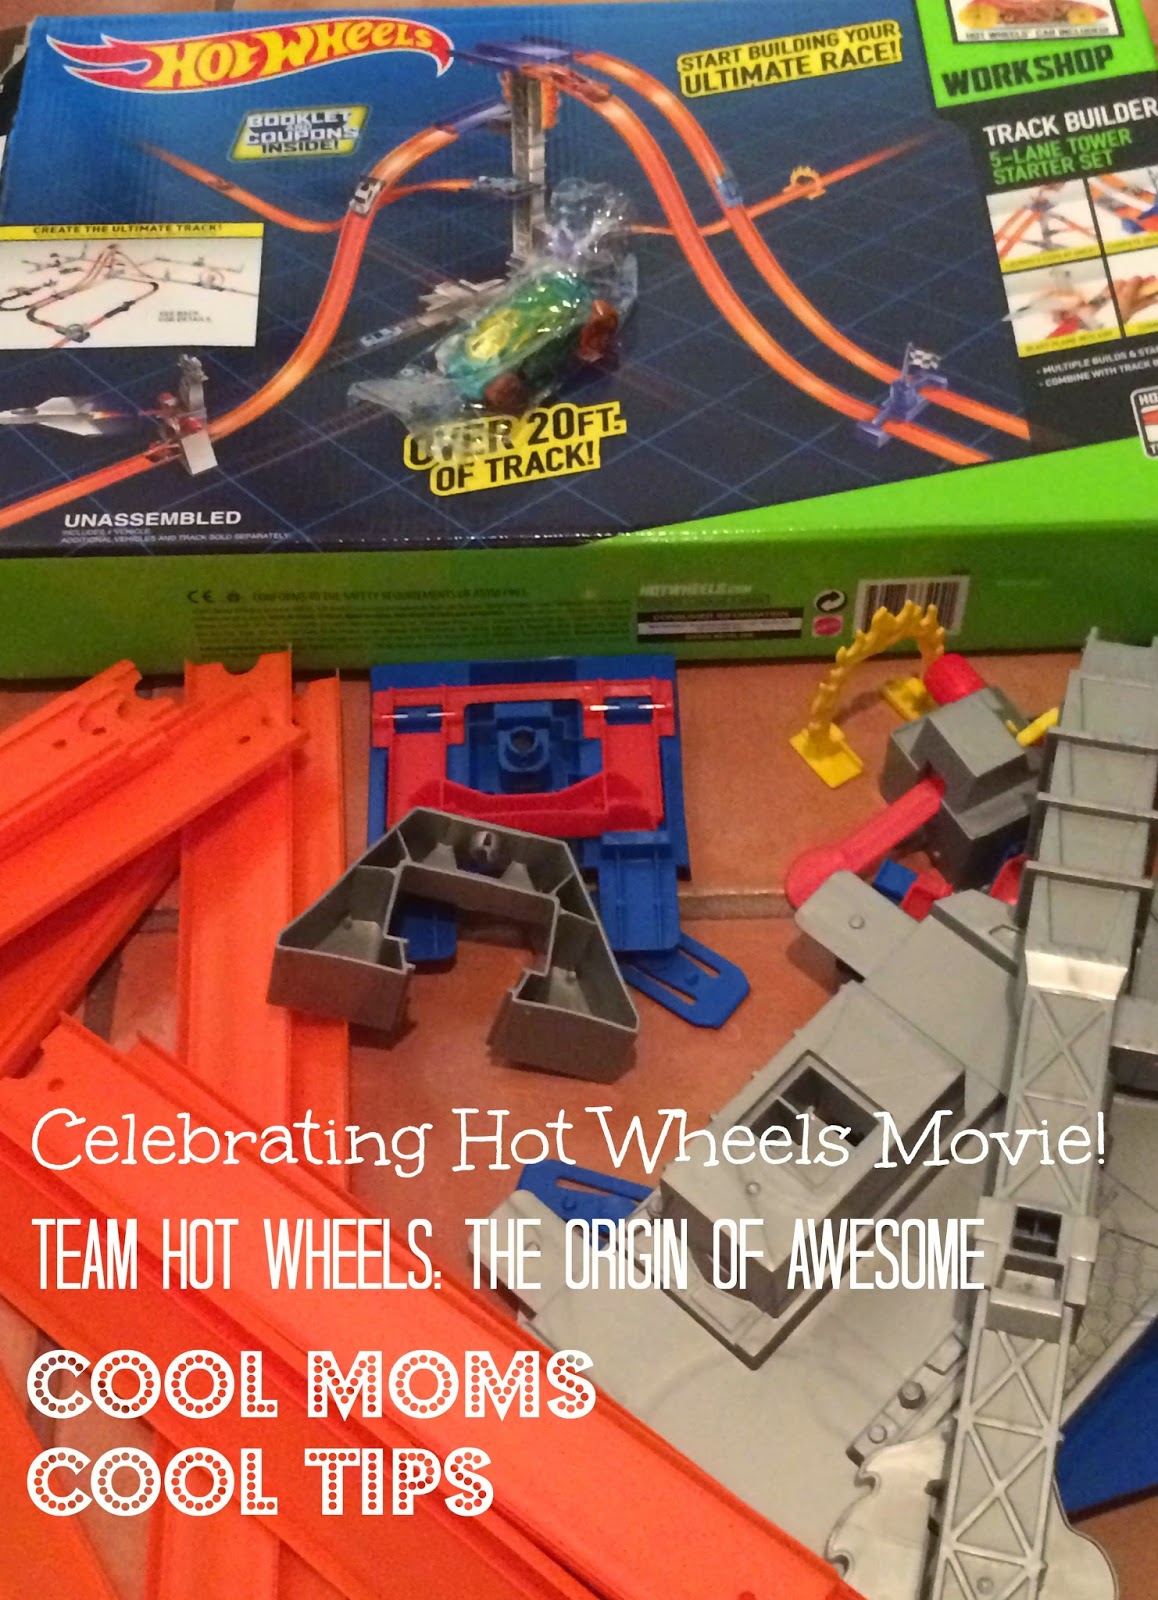 cool moms cool tips Hot Wheels new movie Twam Hot Wheels the Origin of Awesome playing